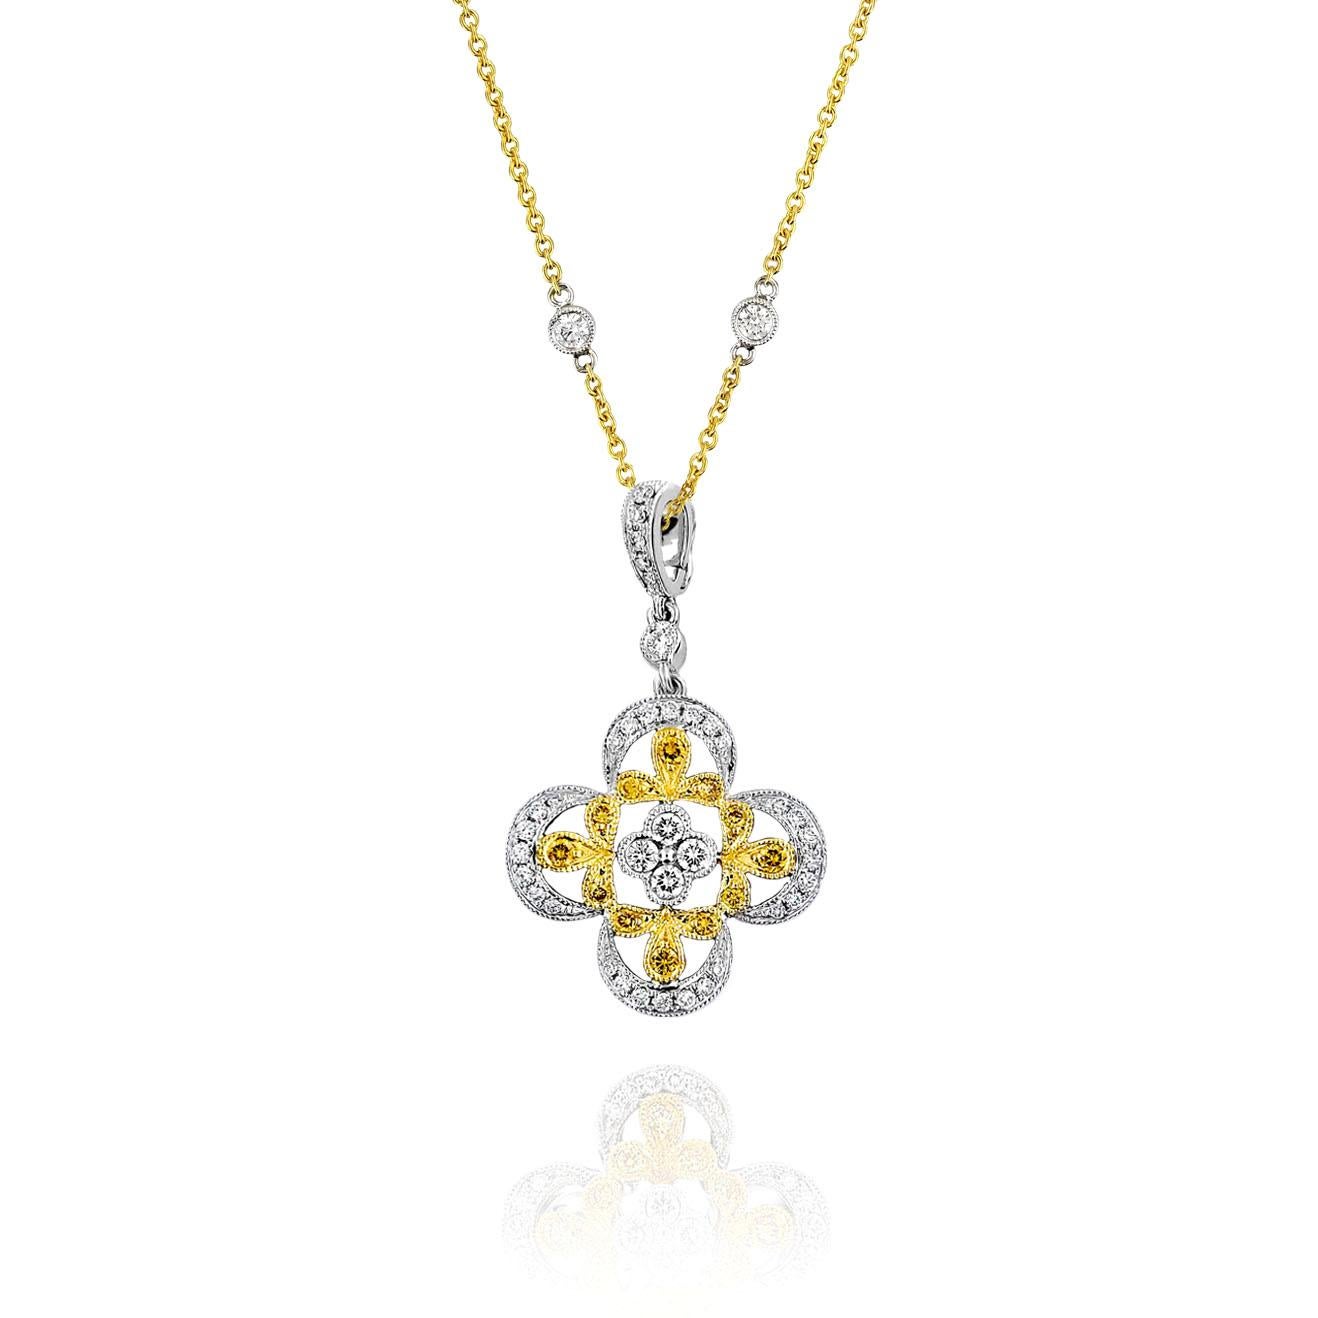 Produced by award winning Italian designer Stefano Vitolo. Stefano creates custom artisanal one of a kind jewelry with excellent gemstones in a truly old world Italian craftmanship.
This diamond pendant has 0.39 total carat weight of F/G color and